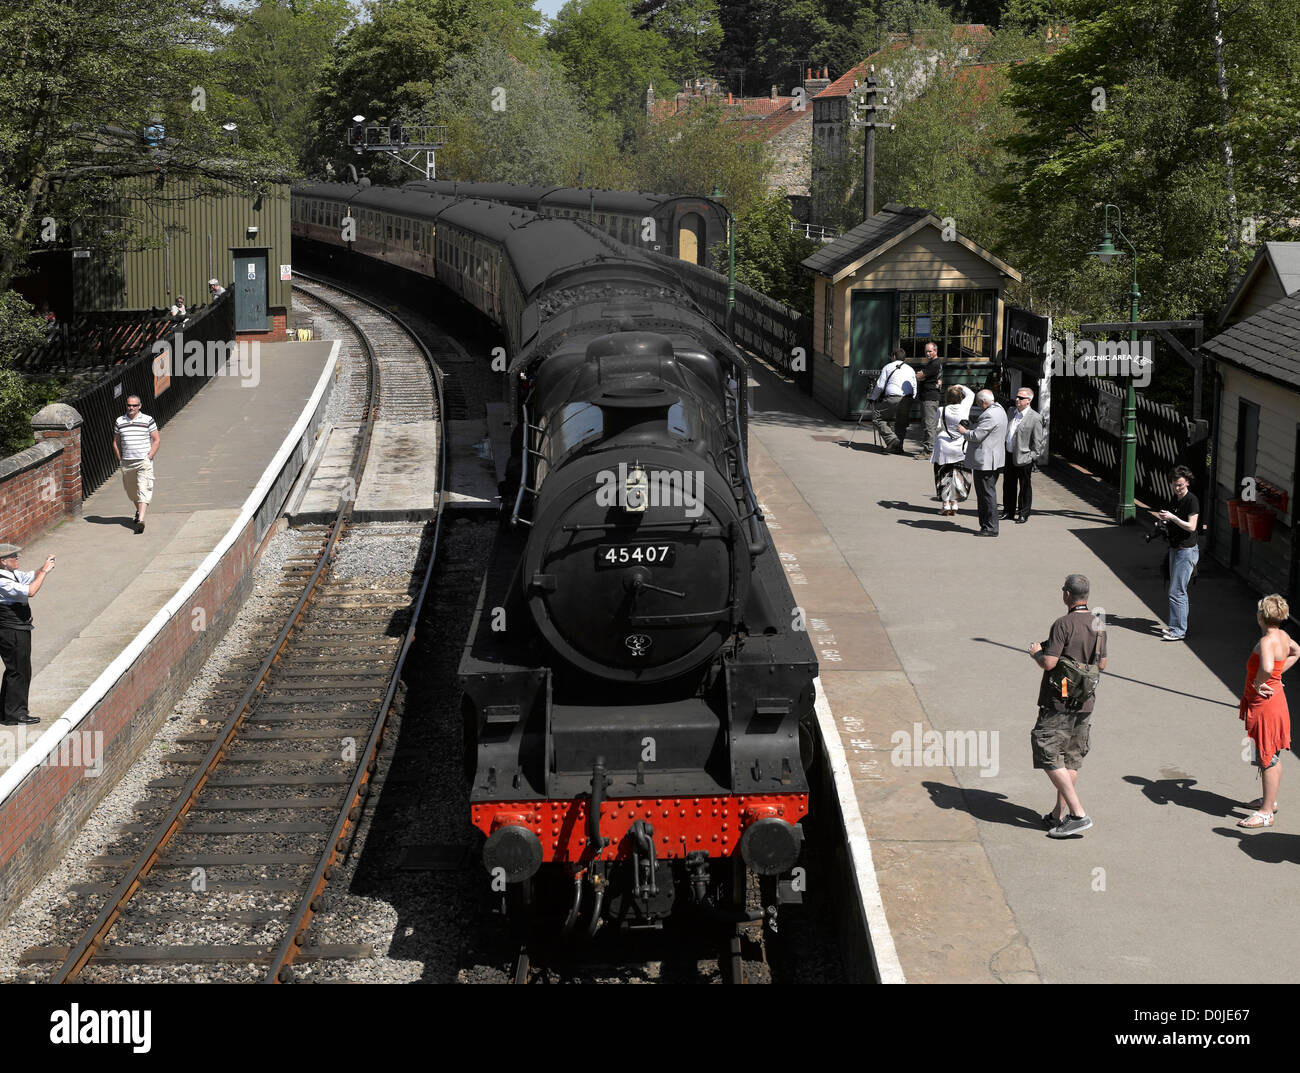 The steam locomotive called Lancashire Fusilier arrives at Pickering railway station. Stock Photo